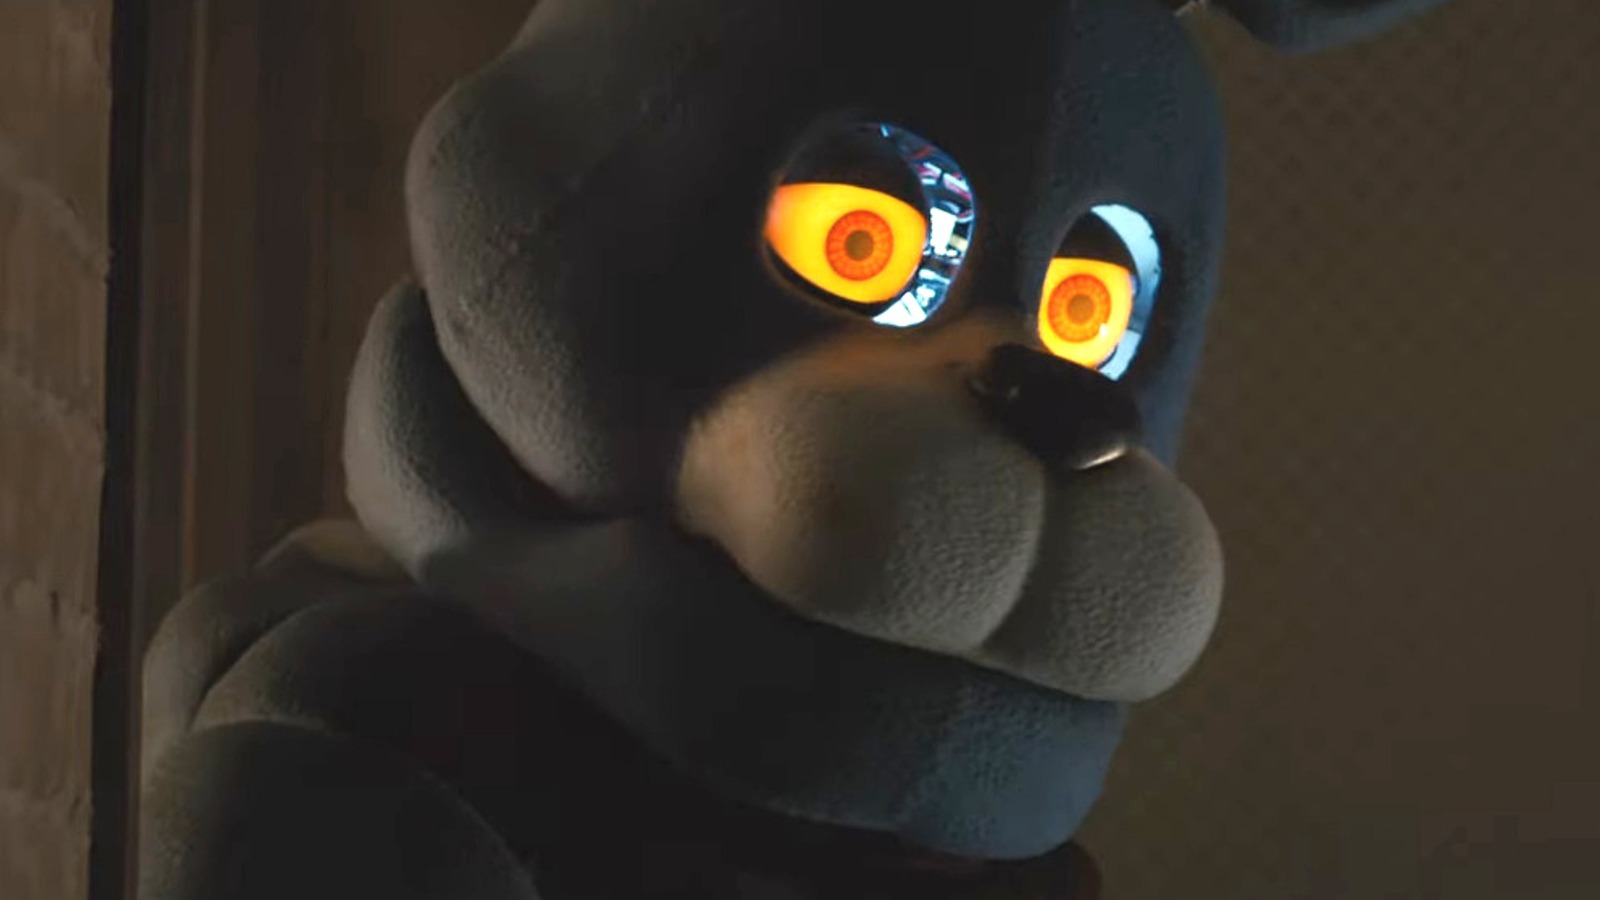 First Look at Five Nights at Freddy's Movie Animatronics In HD